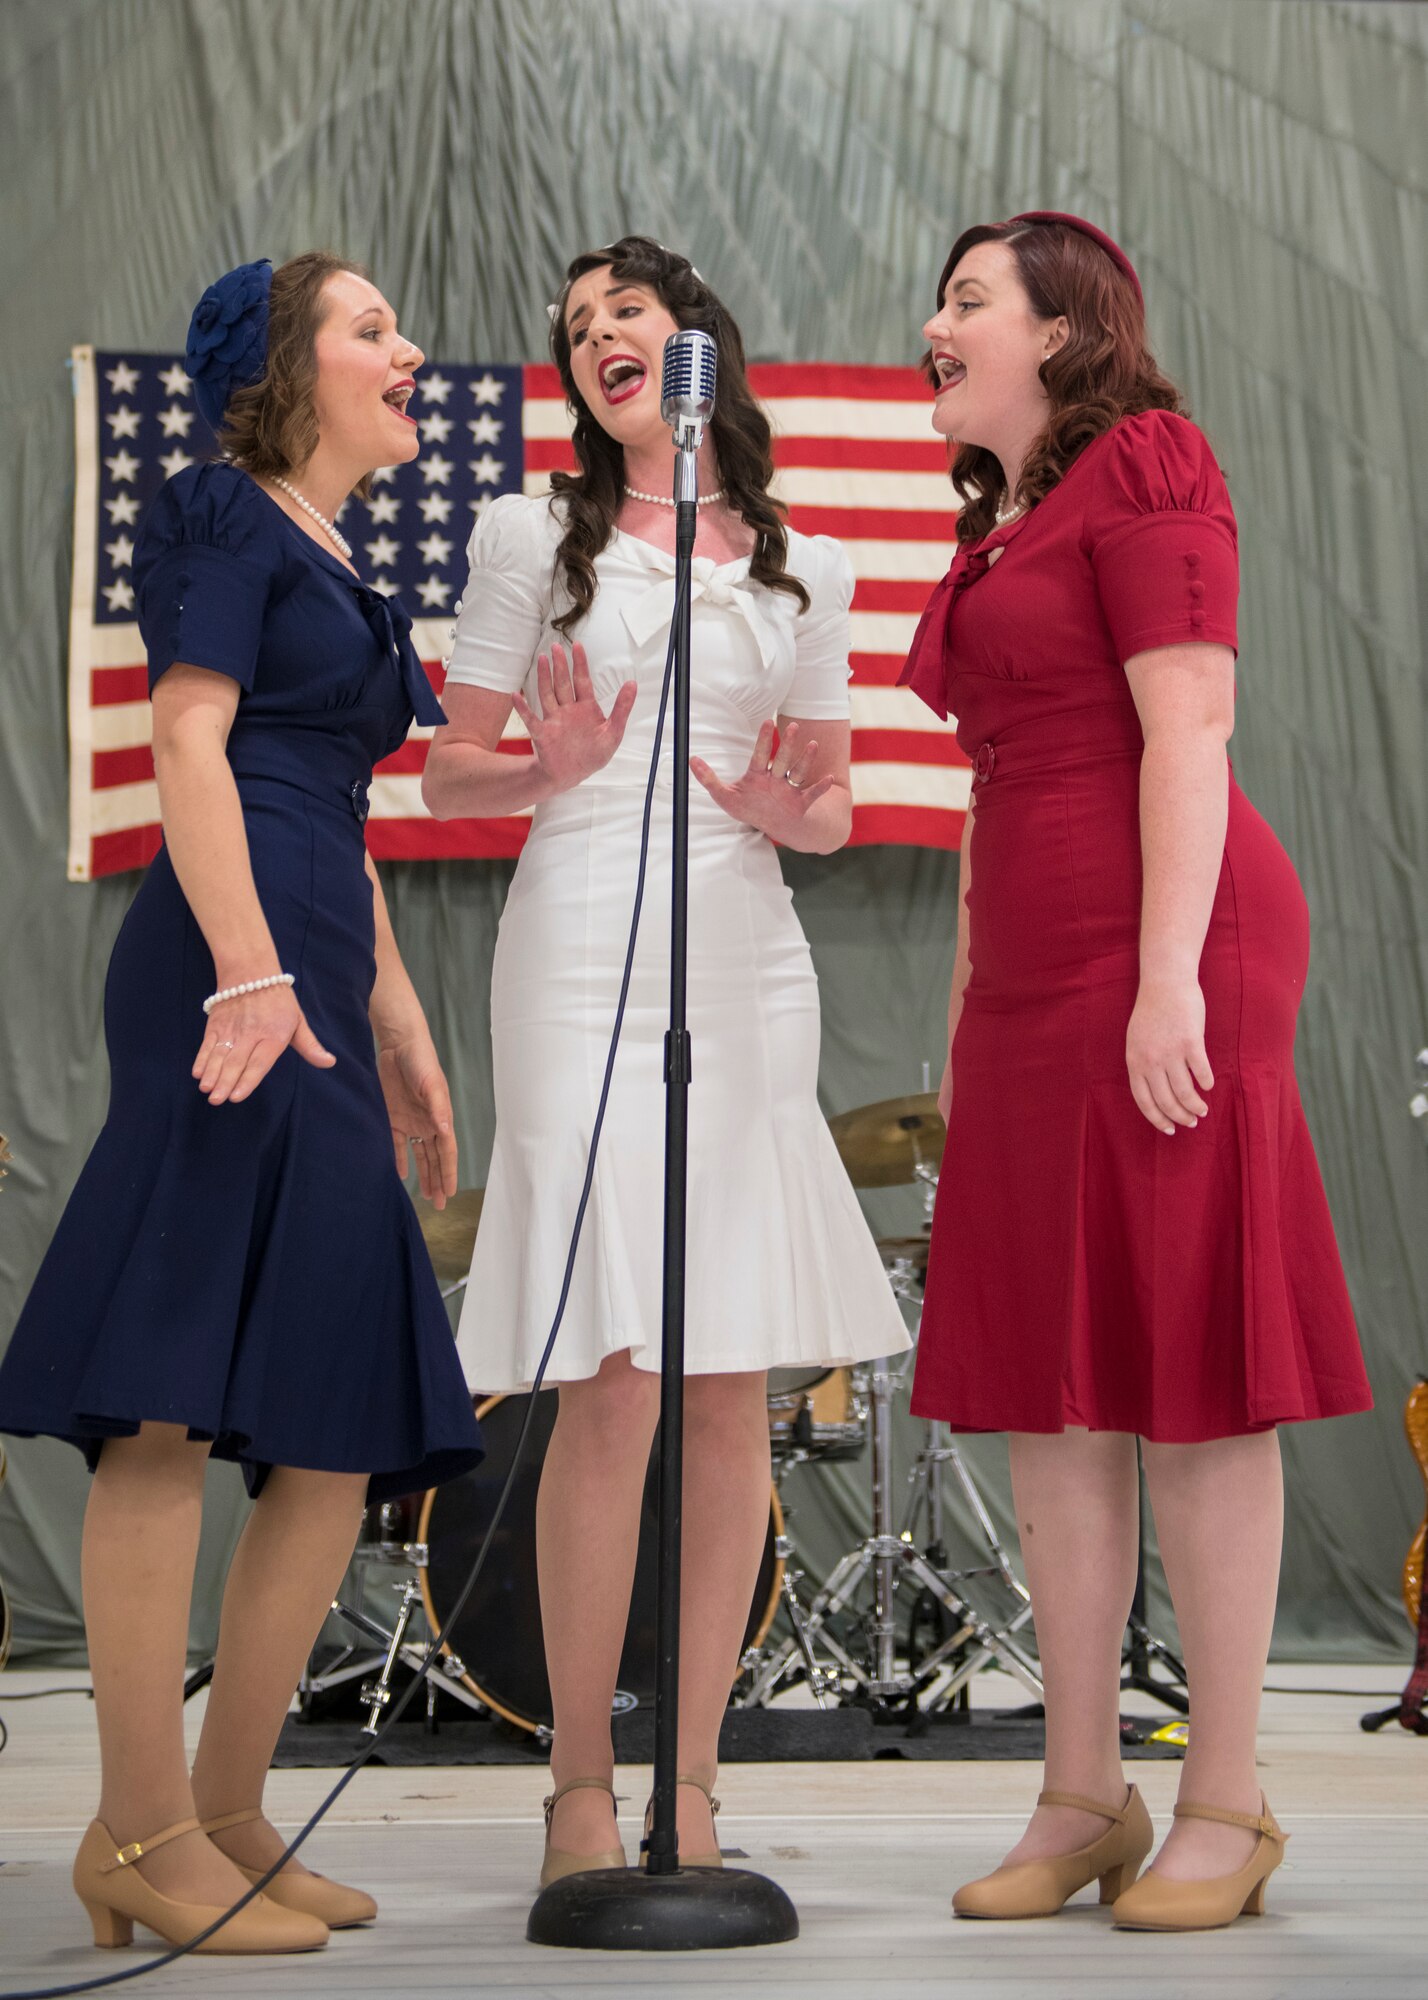 Chloe Hagener, Hilary Marshall and Katie Babbitt (left to right), singers from the local community theater, sing at the Air Force Ball, Sept. 14, 2019, on Holloman Air Force Base, N.M. Every September, the Air Force Ball is celebrated by bases all over the world to commemorate the day the United States Air Force was established, Sept. 18, 1947. (U.S. Air Force photo by Airman 1st Class Kindra Stewart)